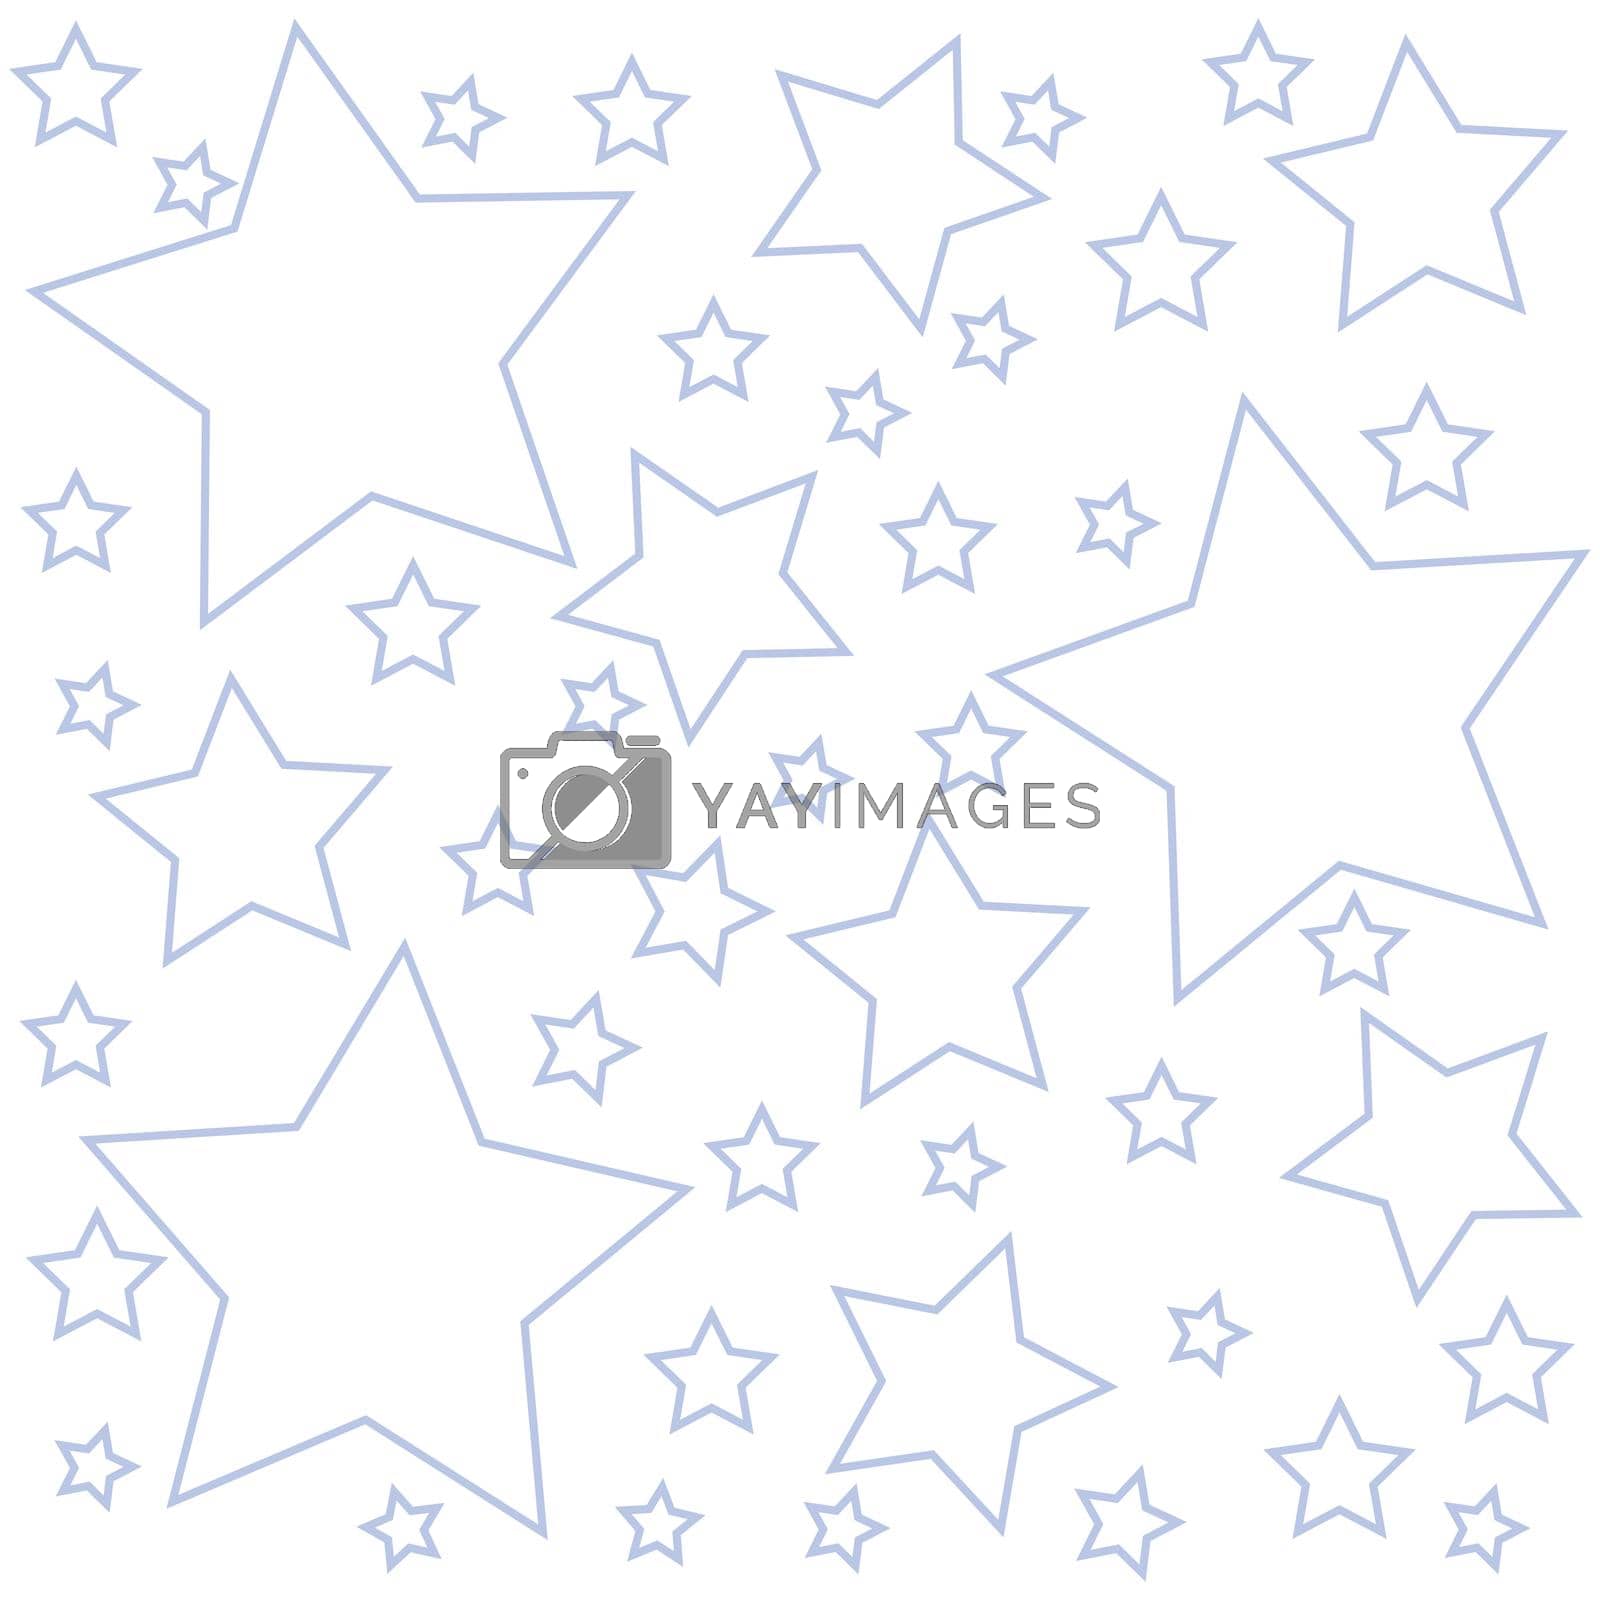 Royalty free image of Design business concept Empty copy text for Web banners promotional material mock up template Outlines of Different Size Star Shape in Random Seamless Repeat Pattern by nialowwa